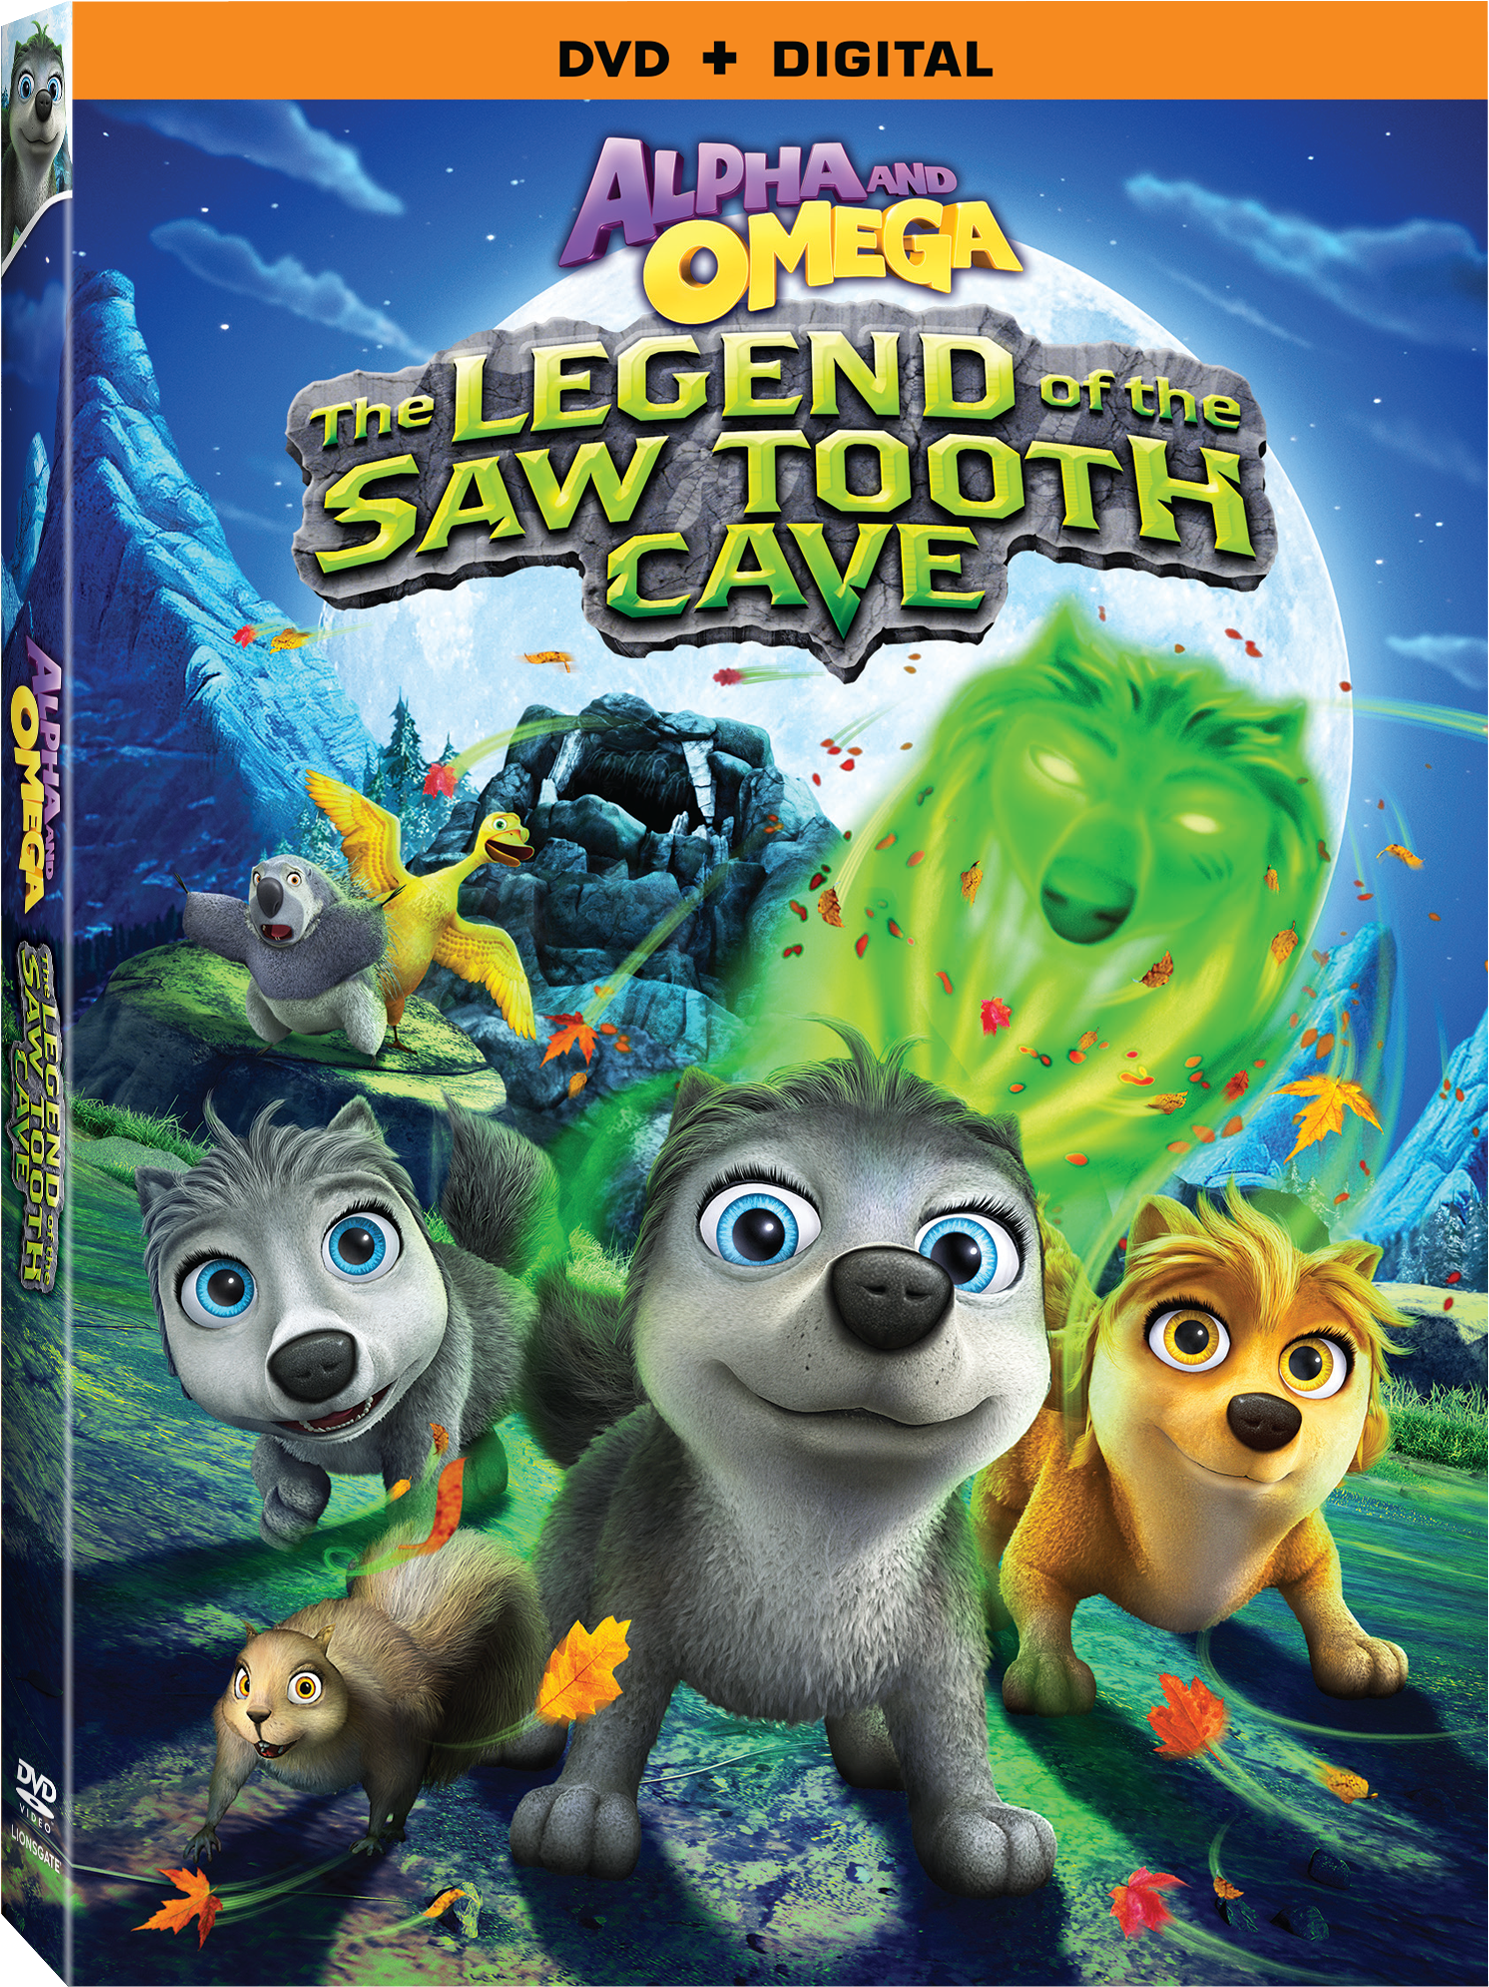 0dc38e94 0639 11e4 9c0c 005056b70bb8 - Alpha And Omega The Legend Of The Saw Toothed Cave (1793x2209), Png Download